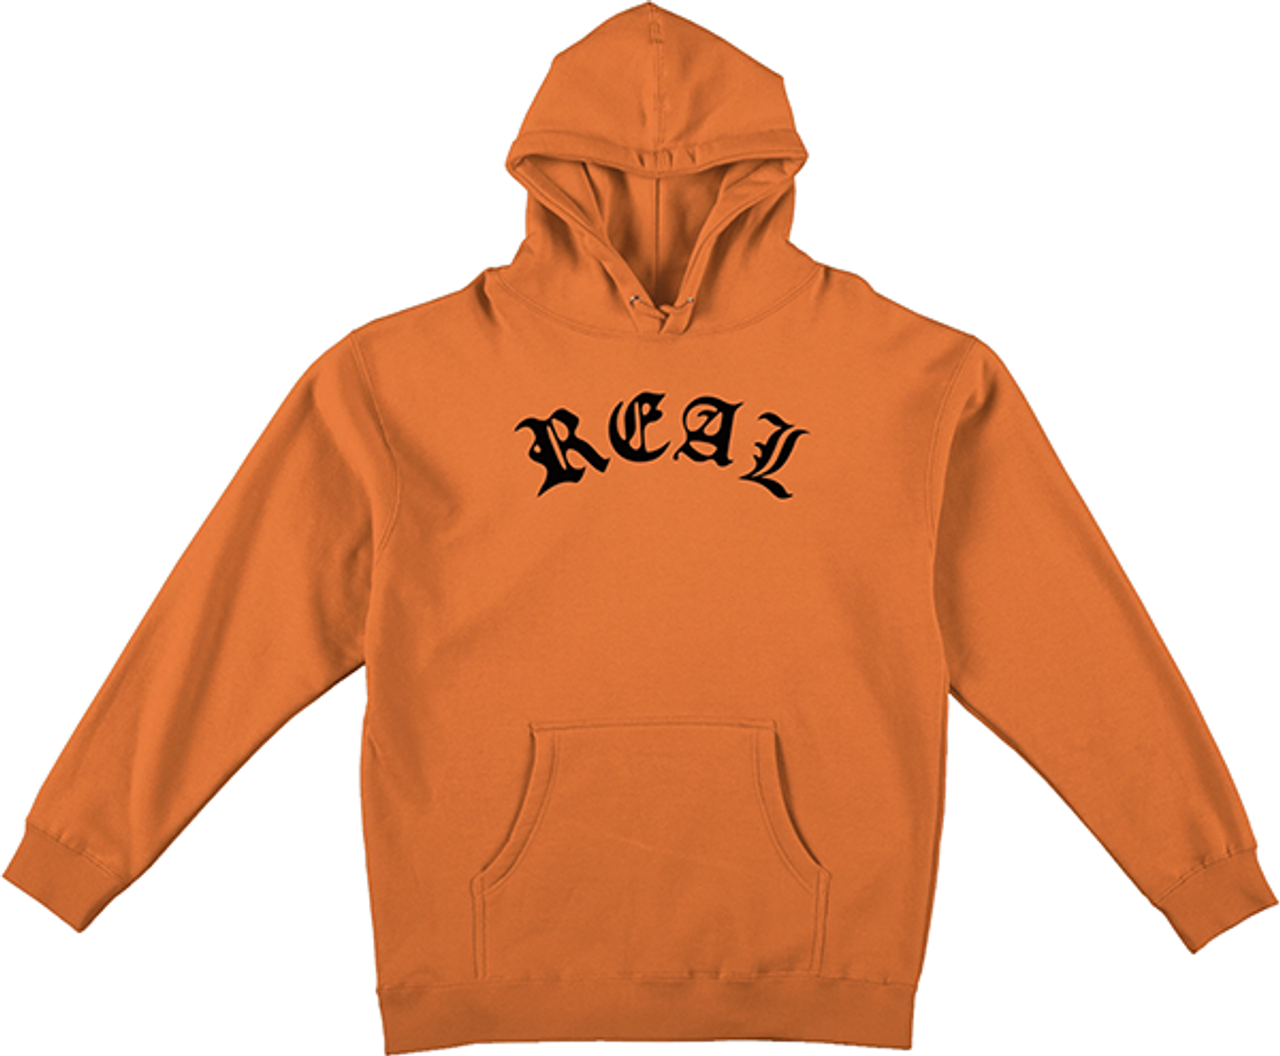 REAL SCRIPT HD/SWT XLARGE SAFETY/ORG/BLK